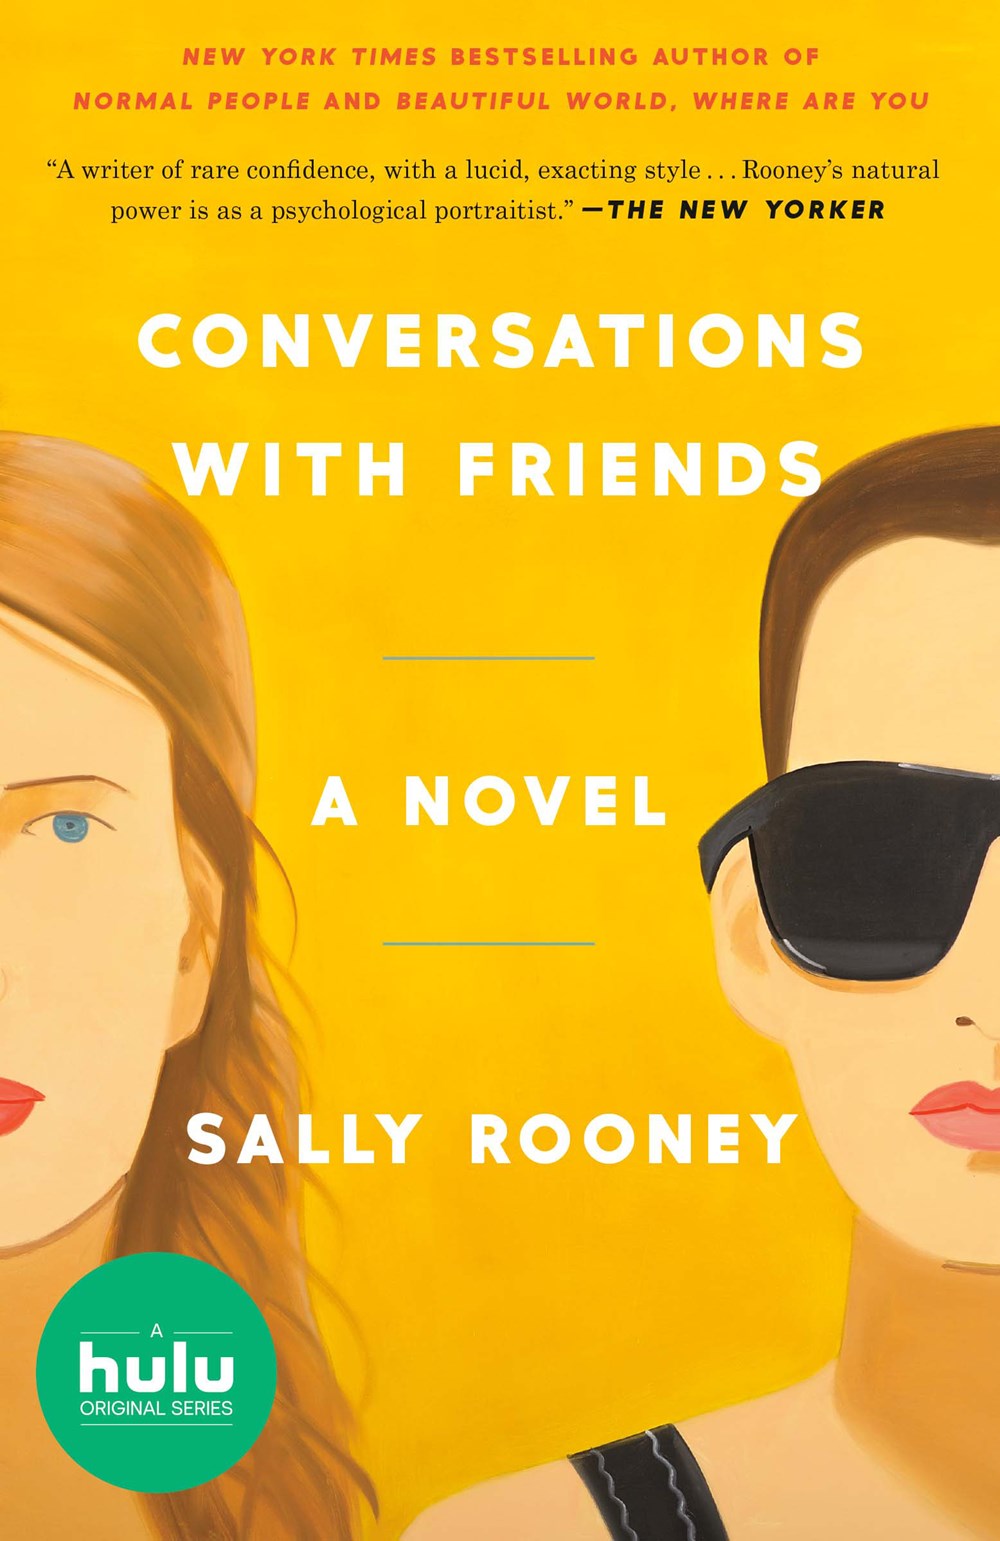 Conversations with Friends: A Novel by Sally Rooney